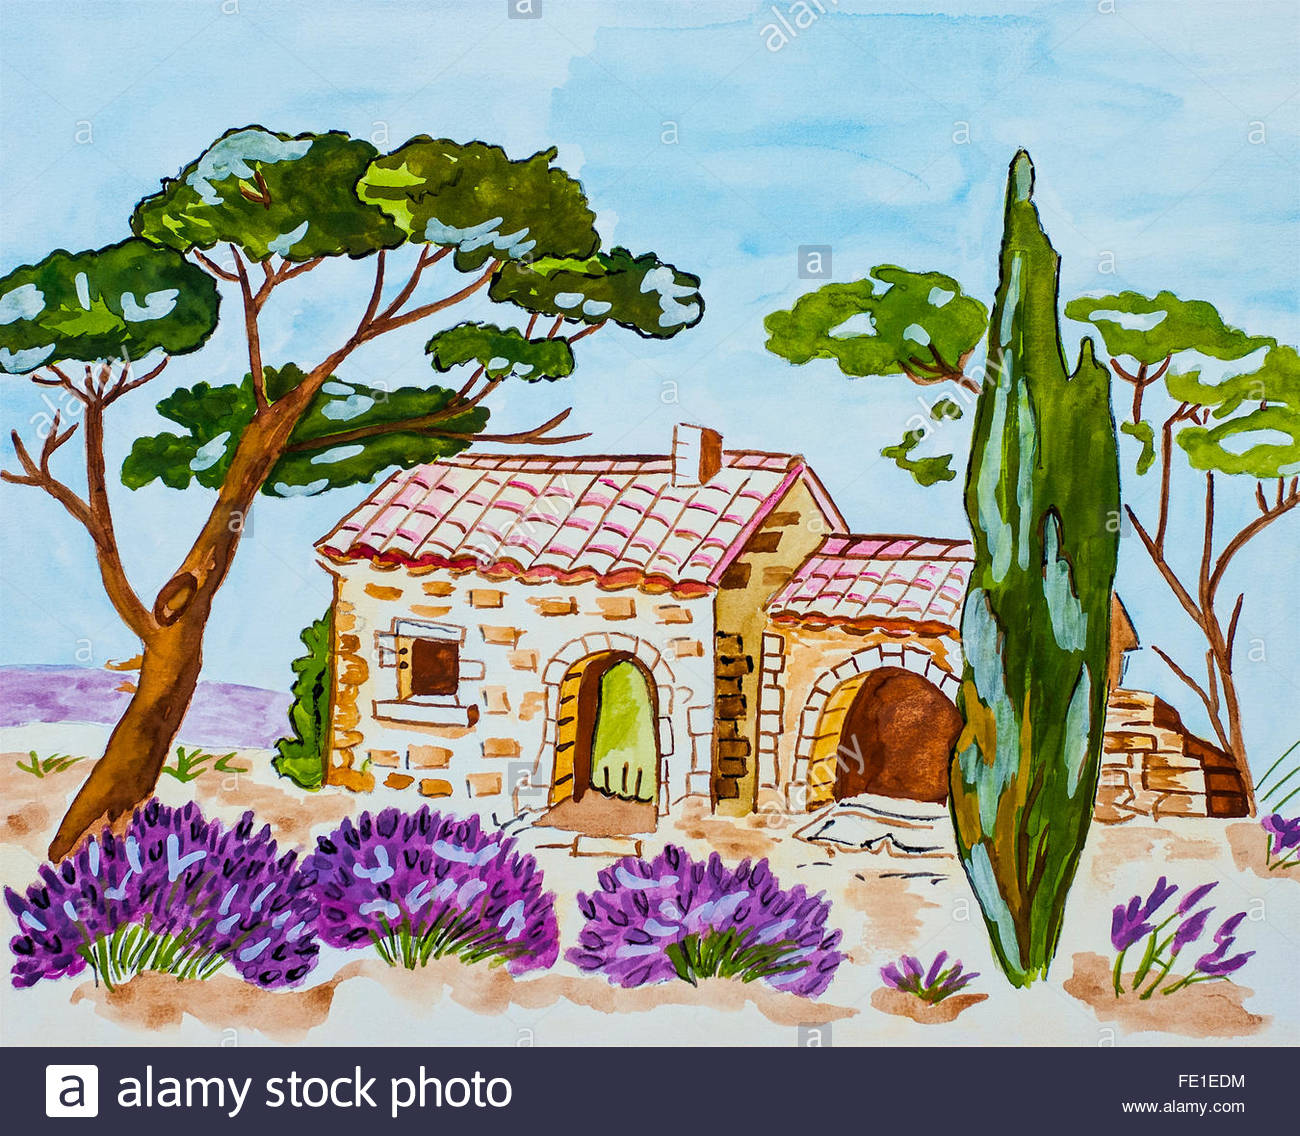 Watercolour Painting “camargue House And Lavender” By Unknown.